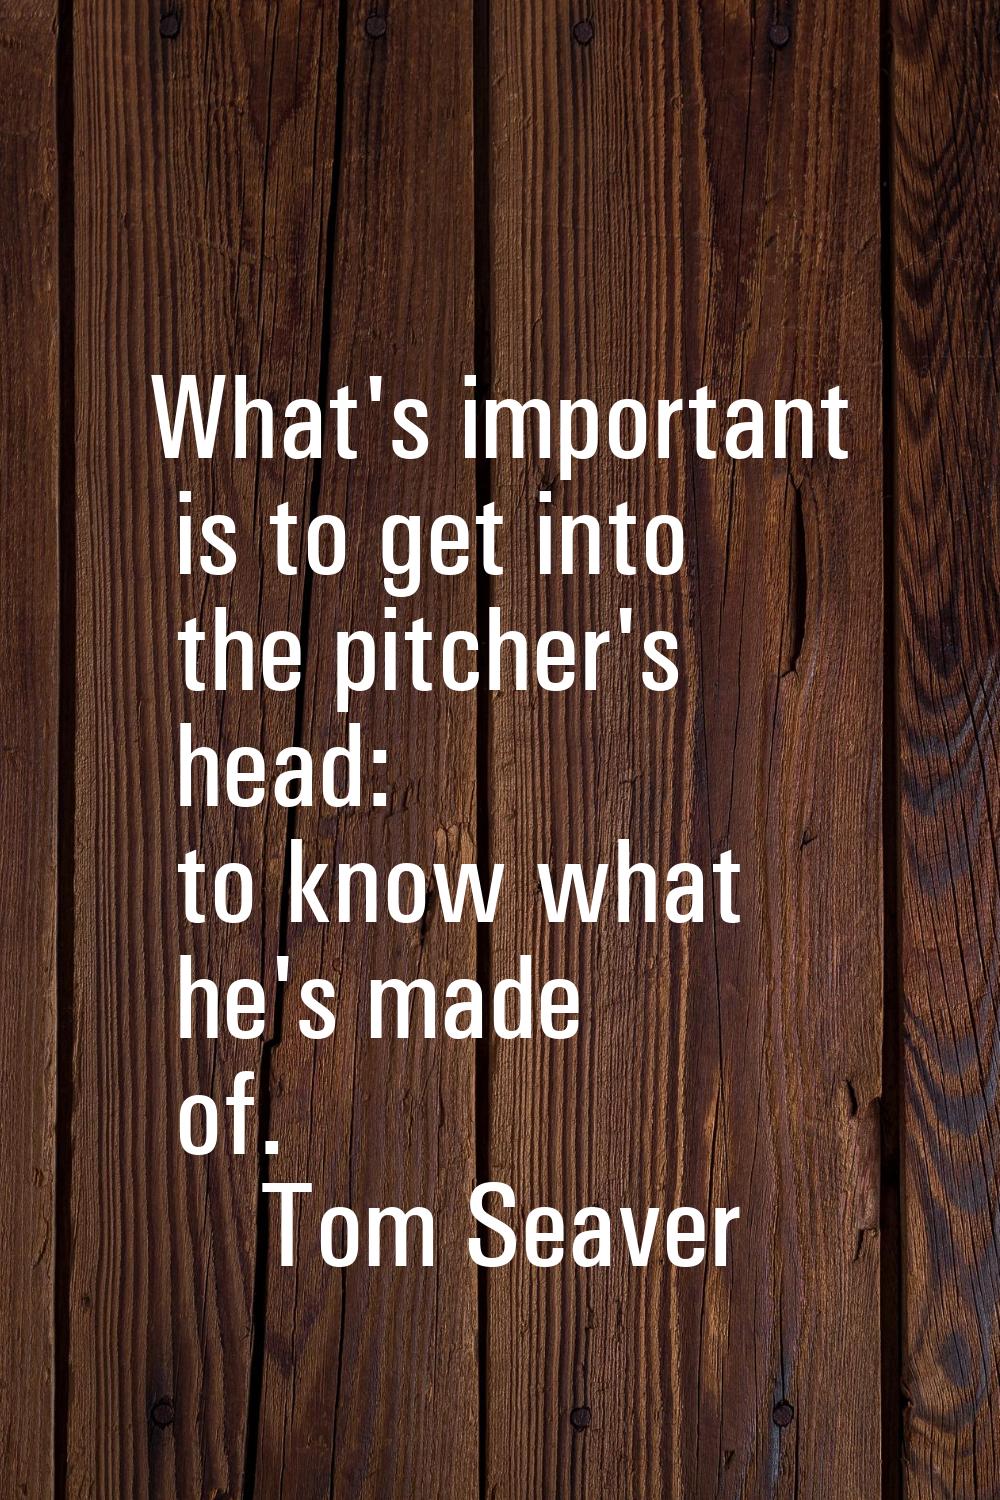 What's important is to get into the pitcher's head: to know what he's made of.